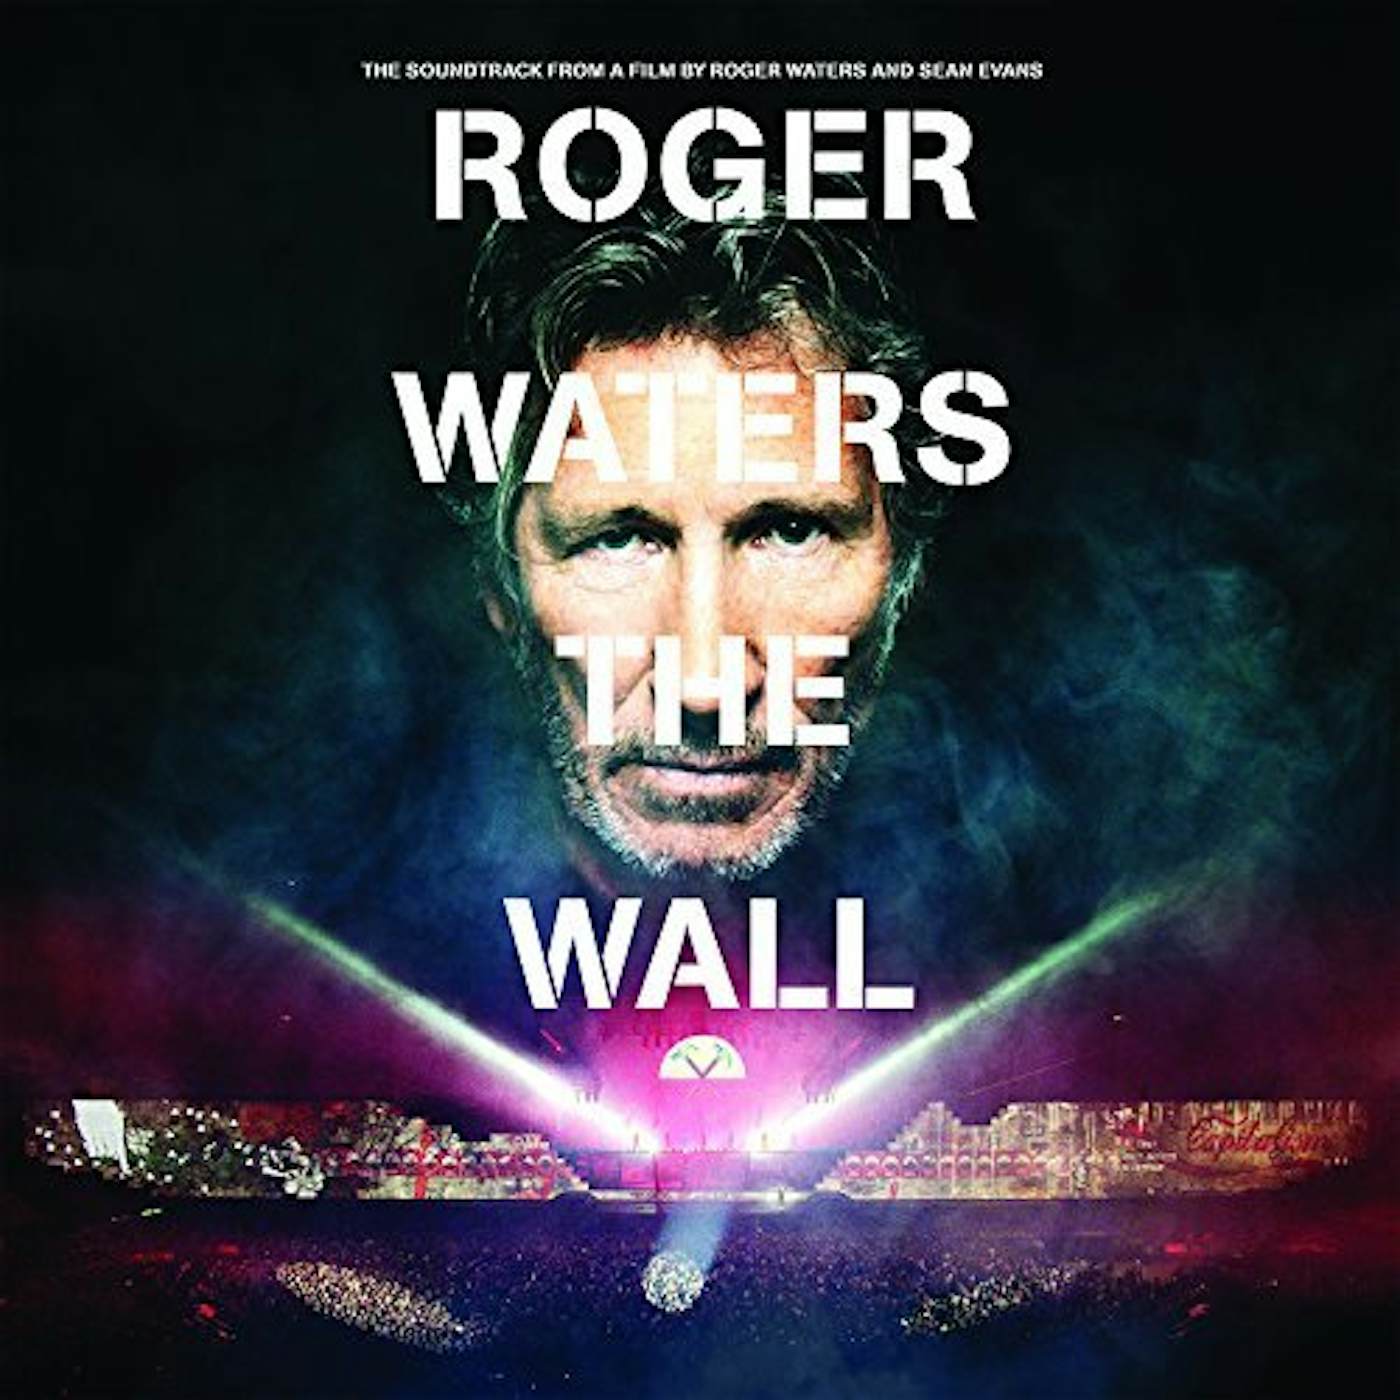 ROGER WATERS THE WALL CD